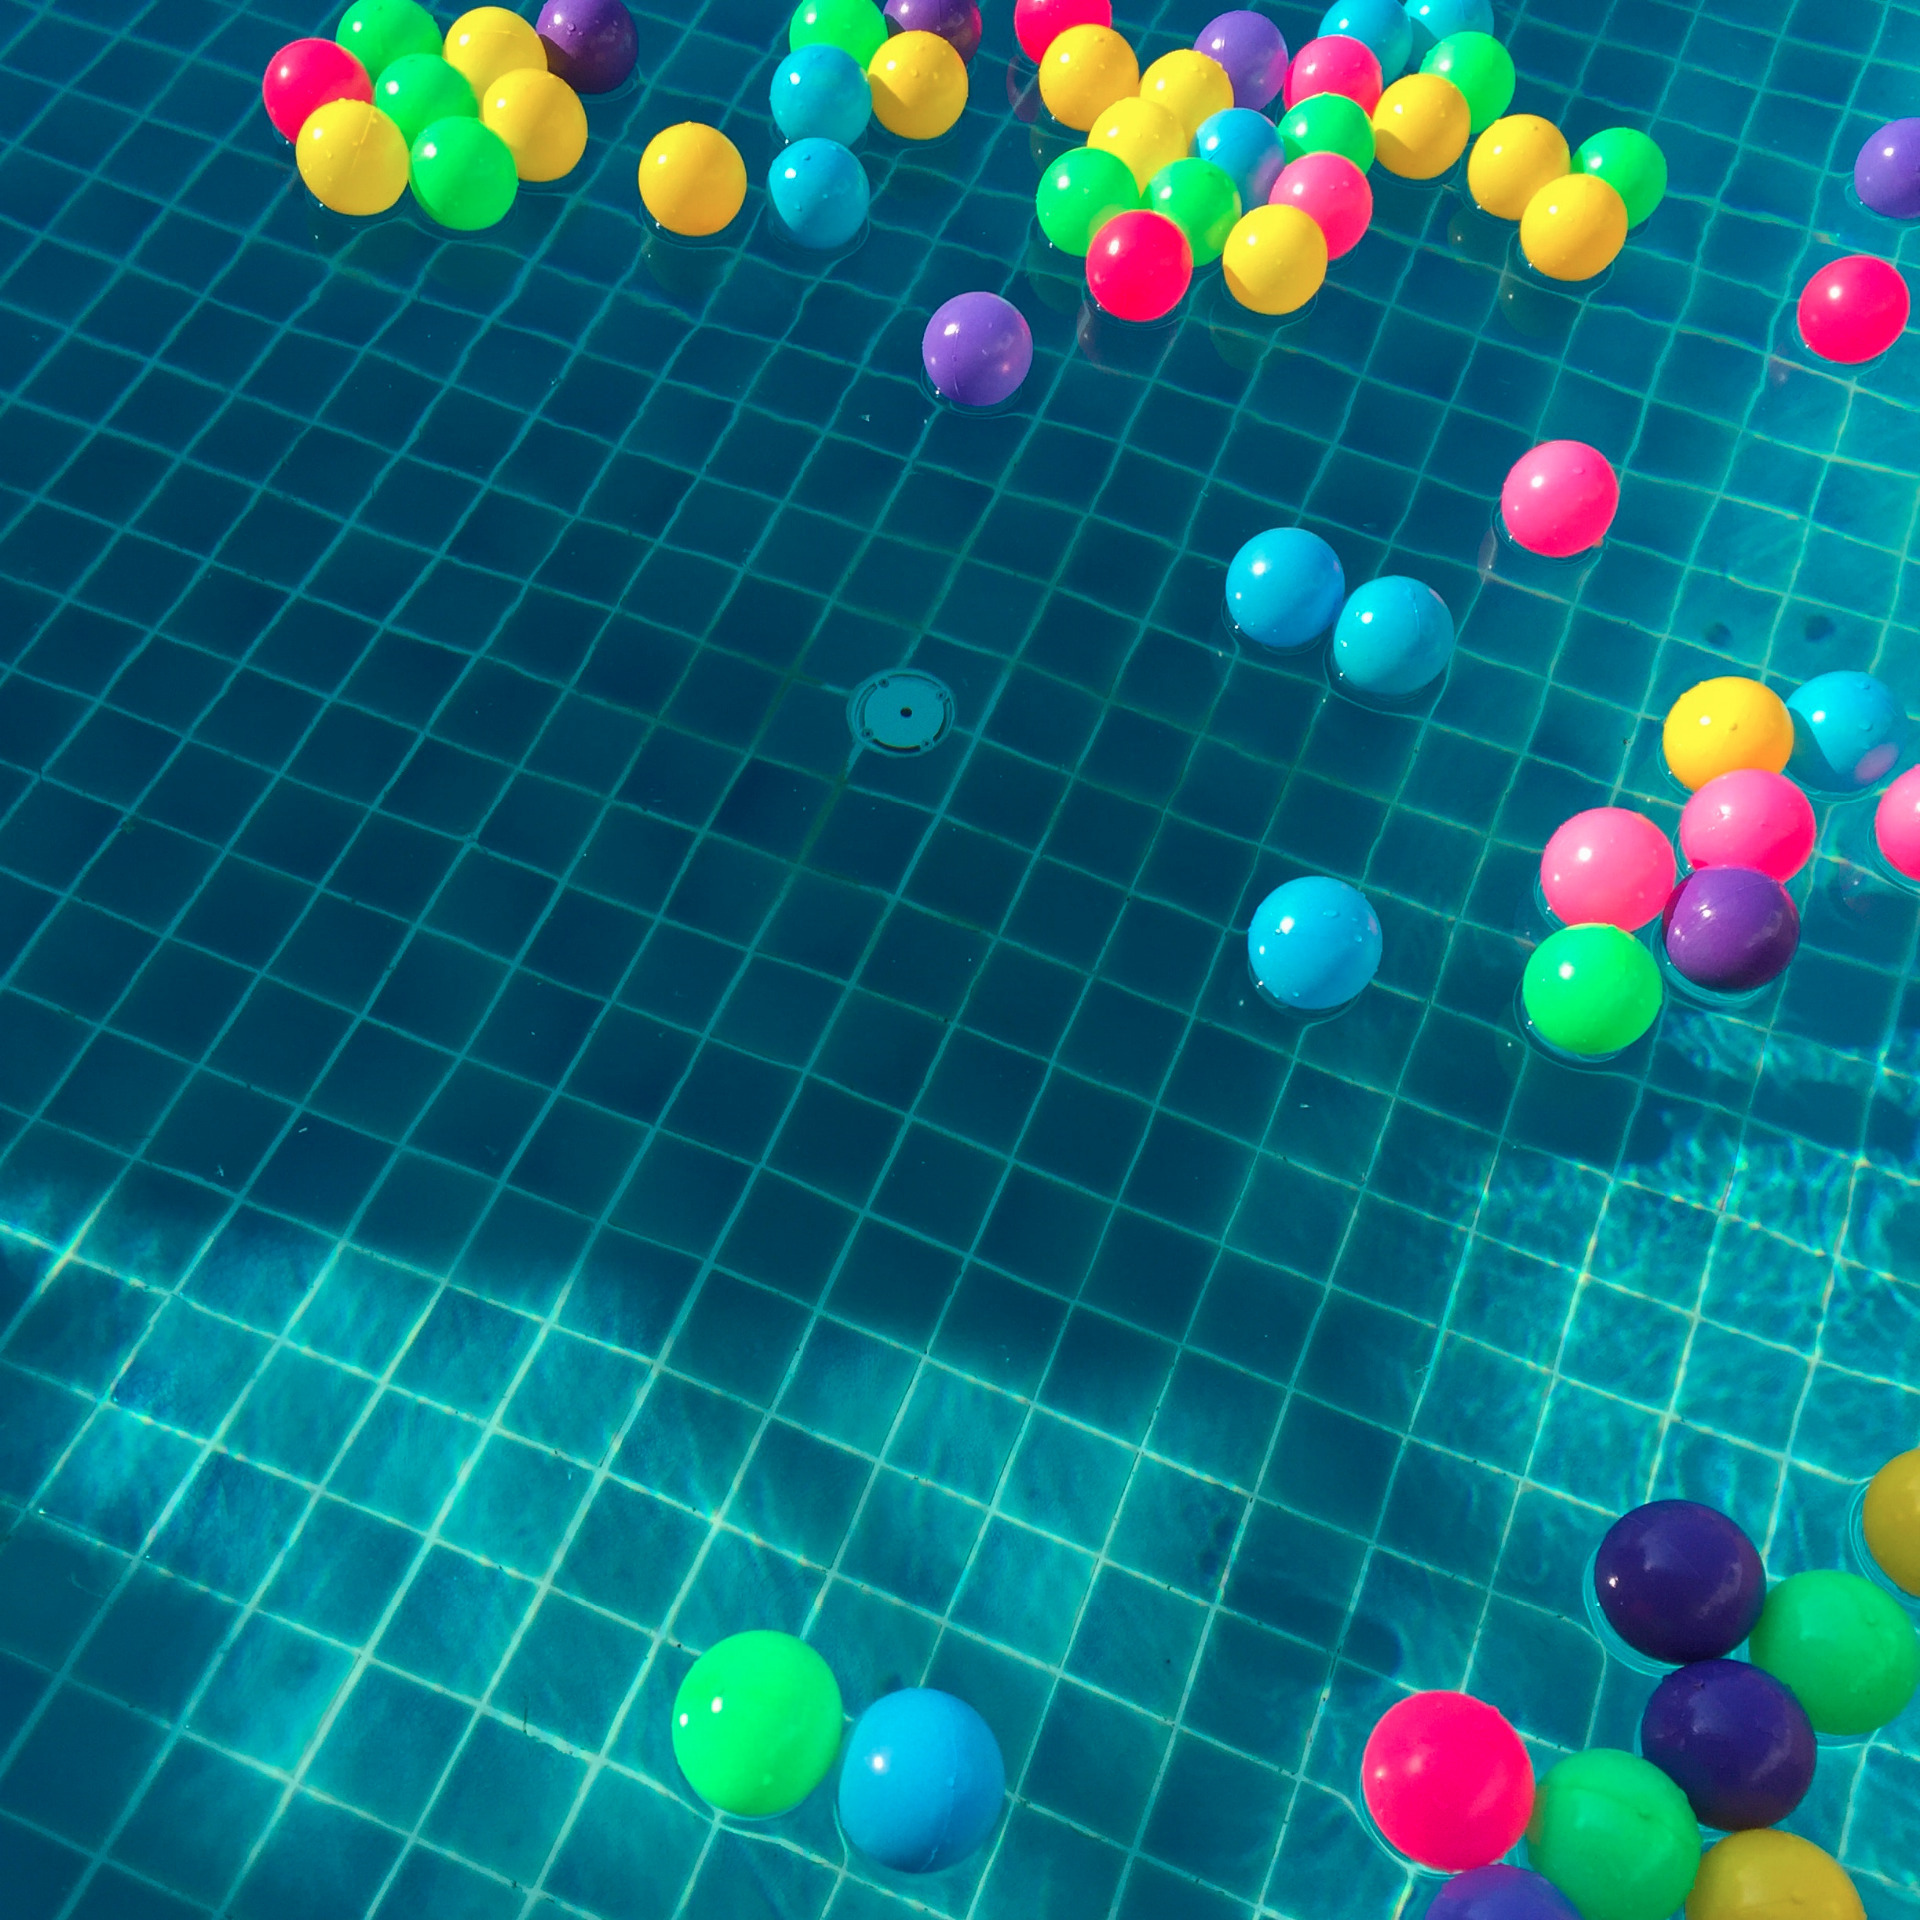 Swimming pool filled with balls